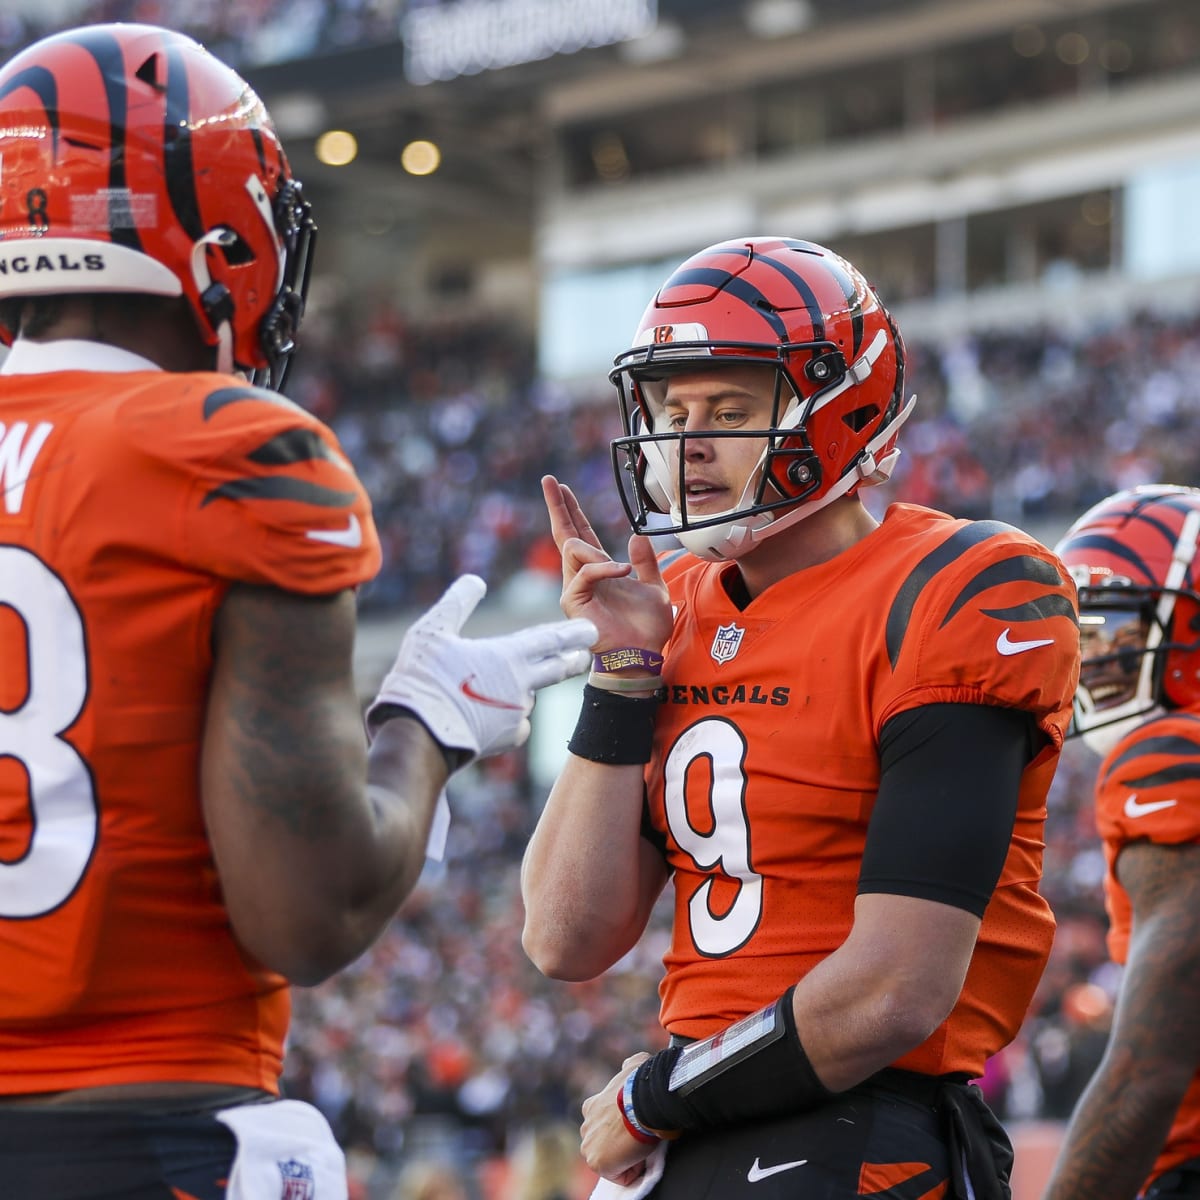 Bengals make it three in a row over Steelers with impressive blowout win